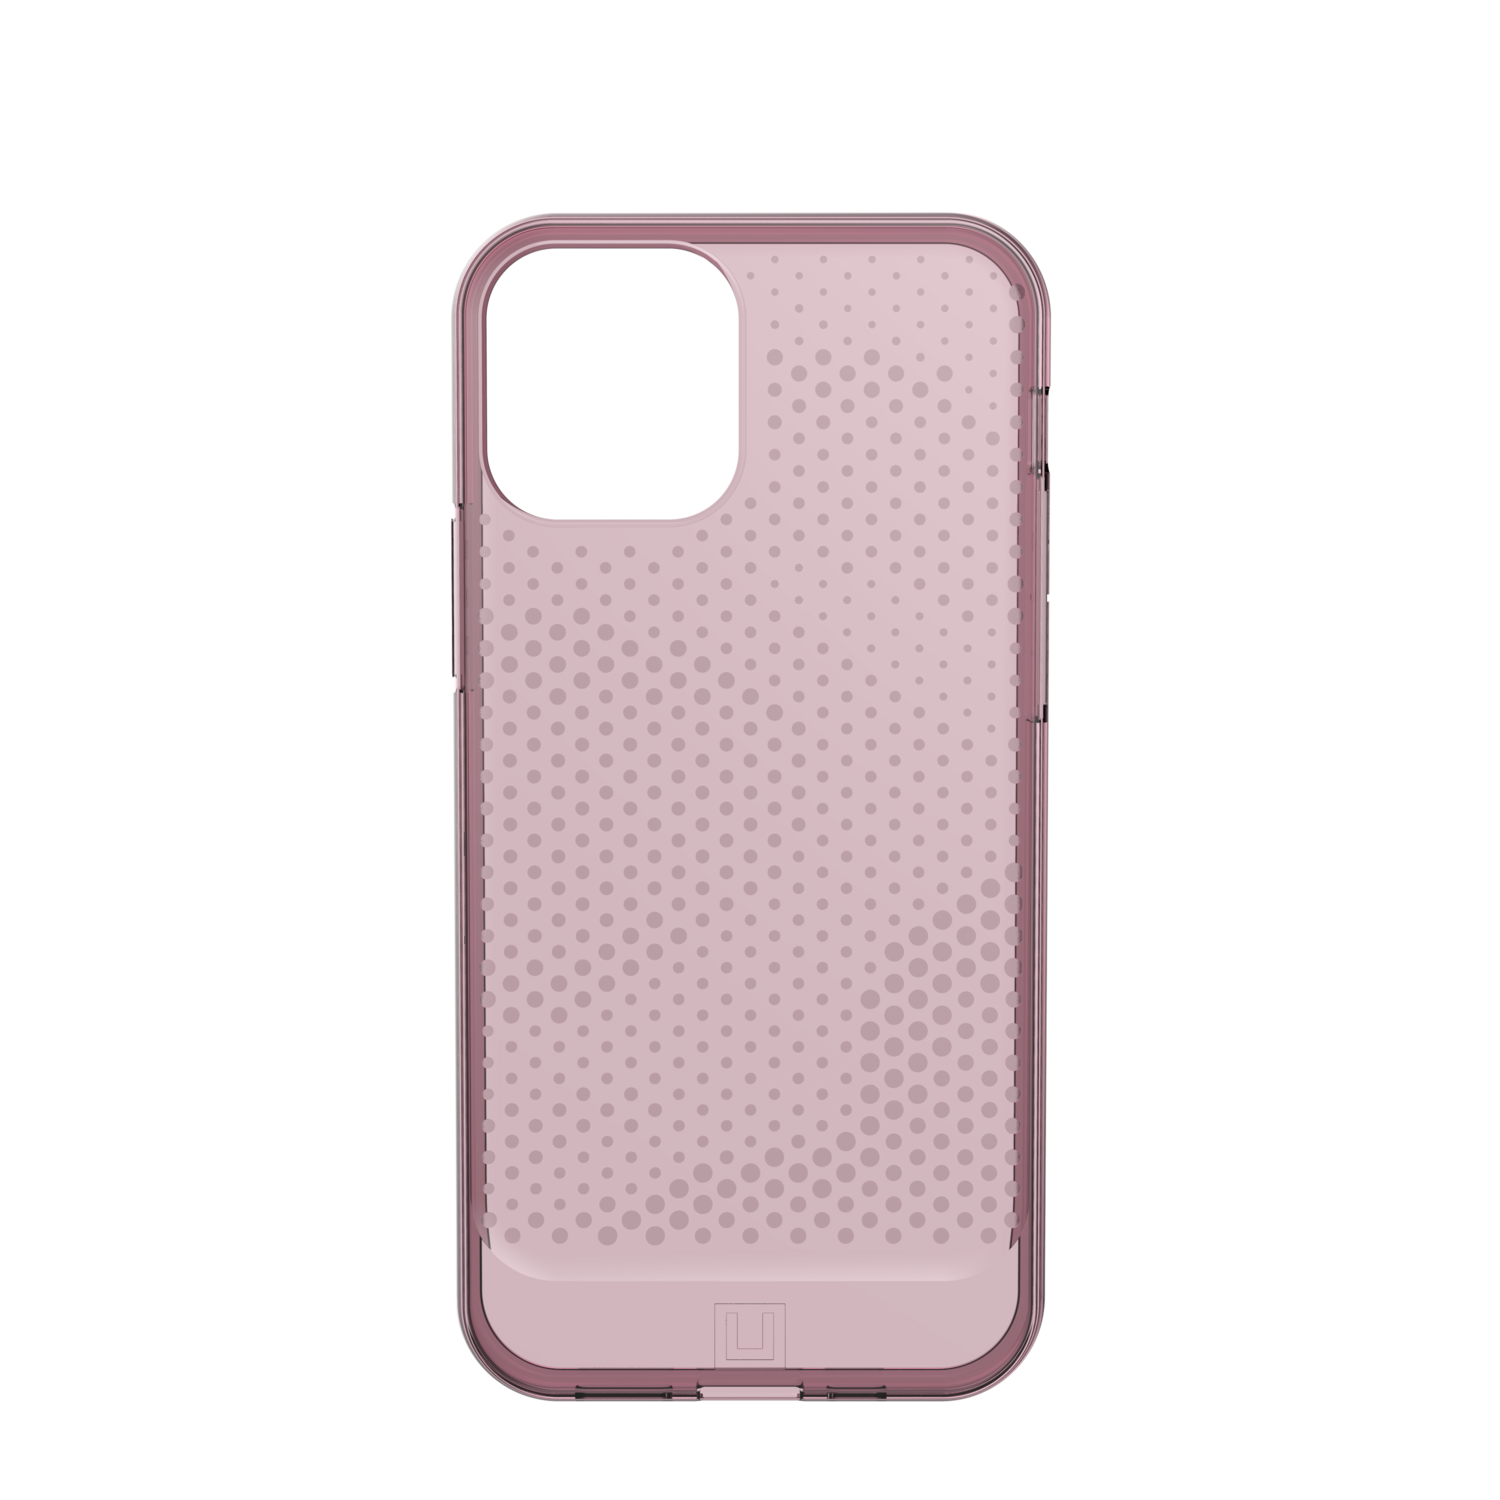 U by UAG iPhone 12 / iPhone 12 Pro 6.1" Lucent Case, Dusty Rose